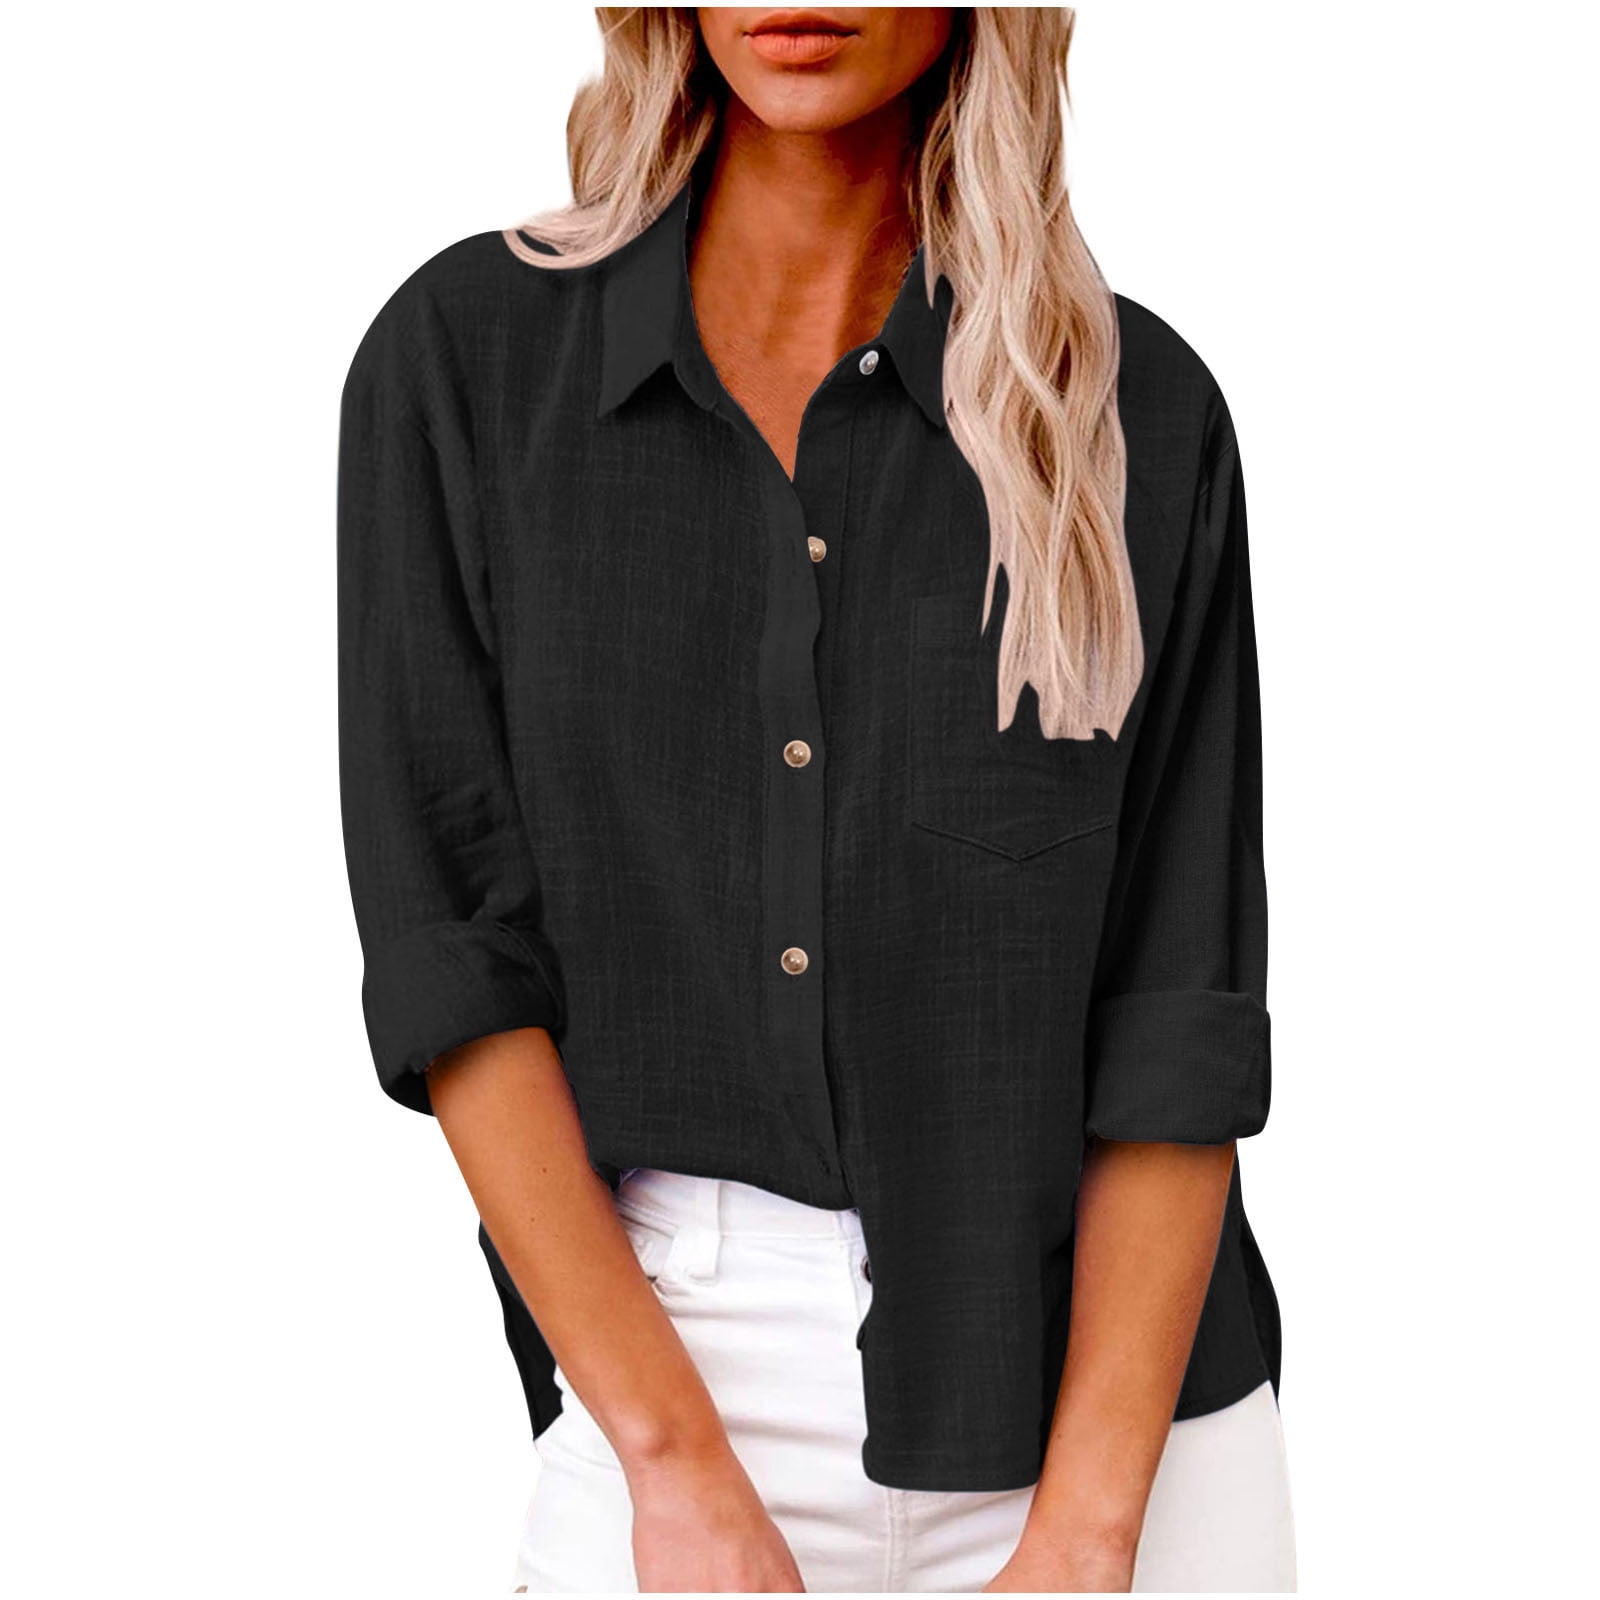 PMUYBHF Women's Casual Temperament Lapel Solid Color Button Long Sleeved  Shirt T Shirt L Plus Size Tops for Women Work Solid Colors 3X Black Hoodie  Women Zip up Oversized 